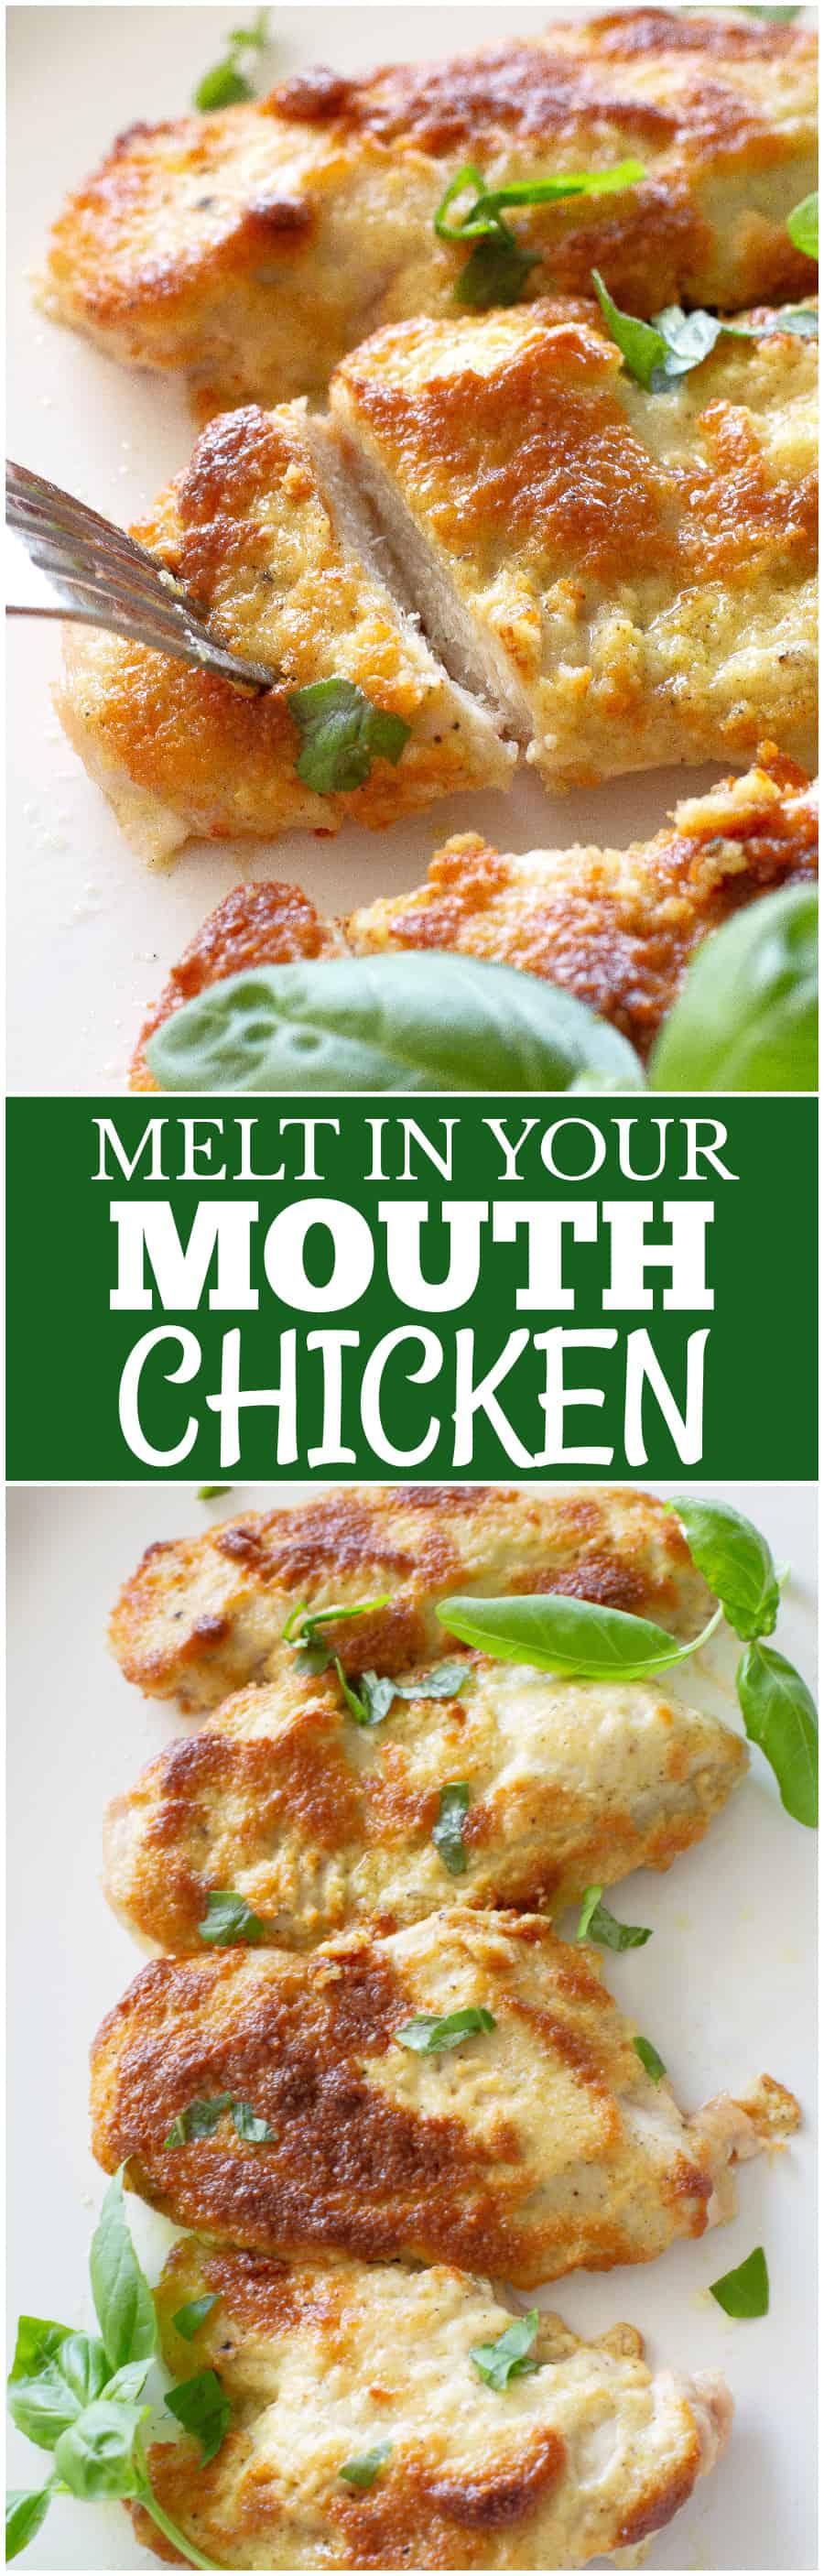 Melt in Your Mouth Chicken 